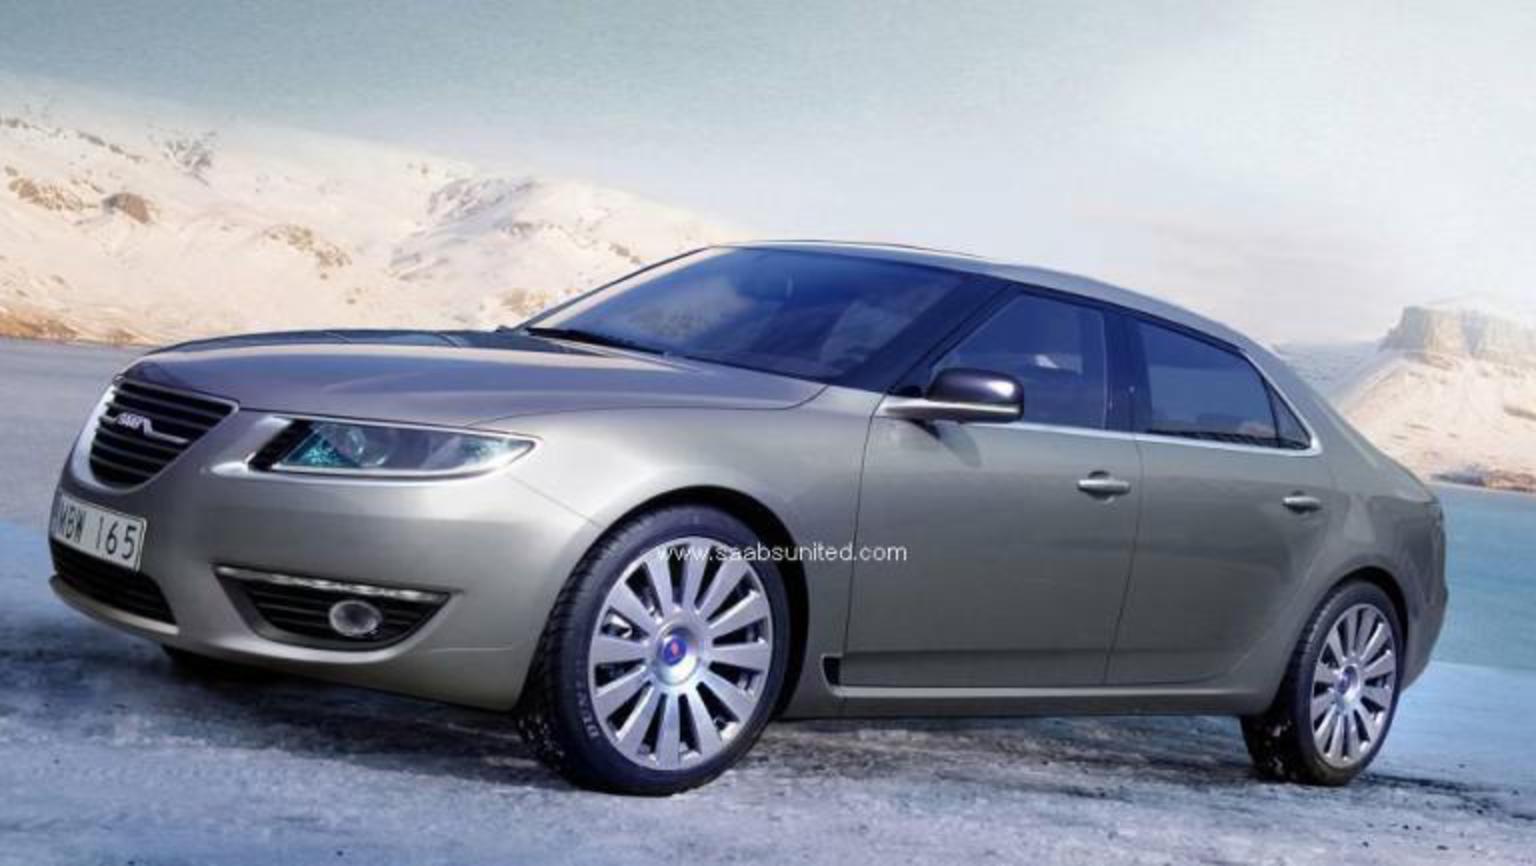 Cars Pictures Gallery: 2010 Saab 9-